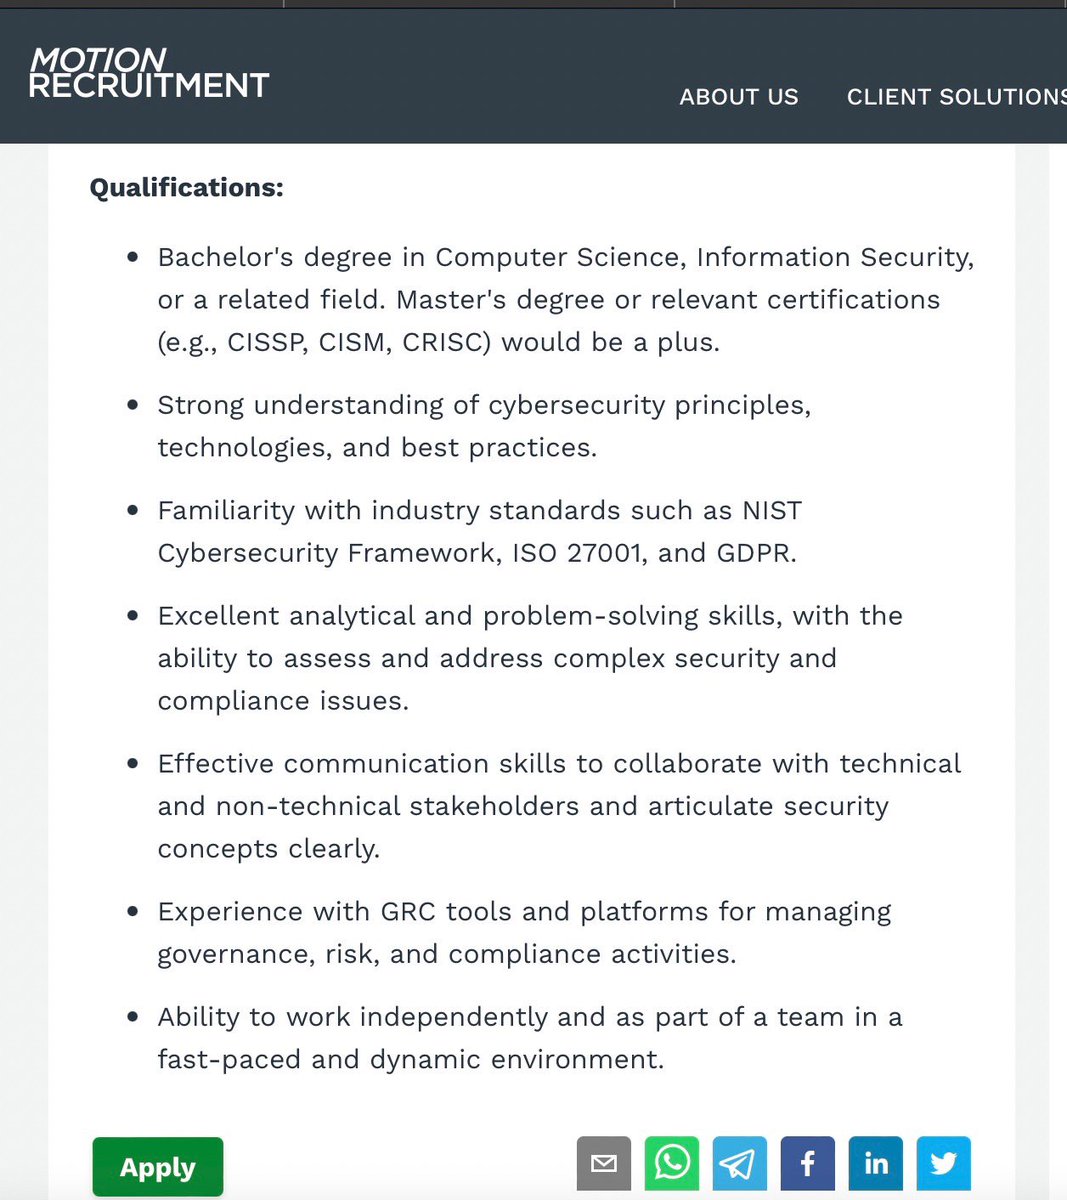 Checkout this GRC #Cybersec role. This is what a GRC professional can envision as one grows their experience and career. GRC roles are a little less technical than other cyber roles but a very lucrative path. Discover what you’re most interested in and get started! #cybercareers